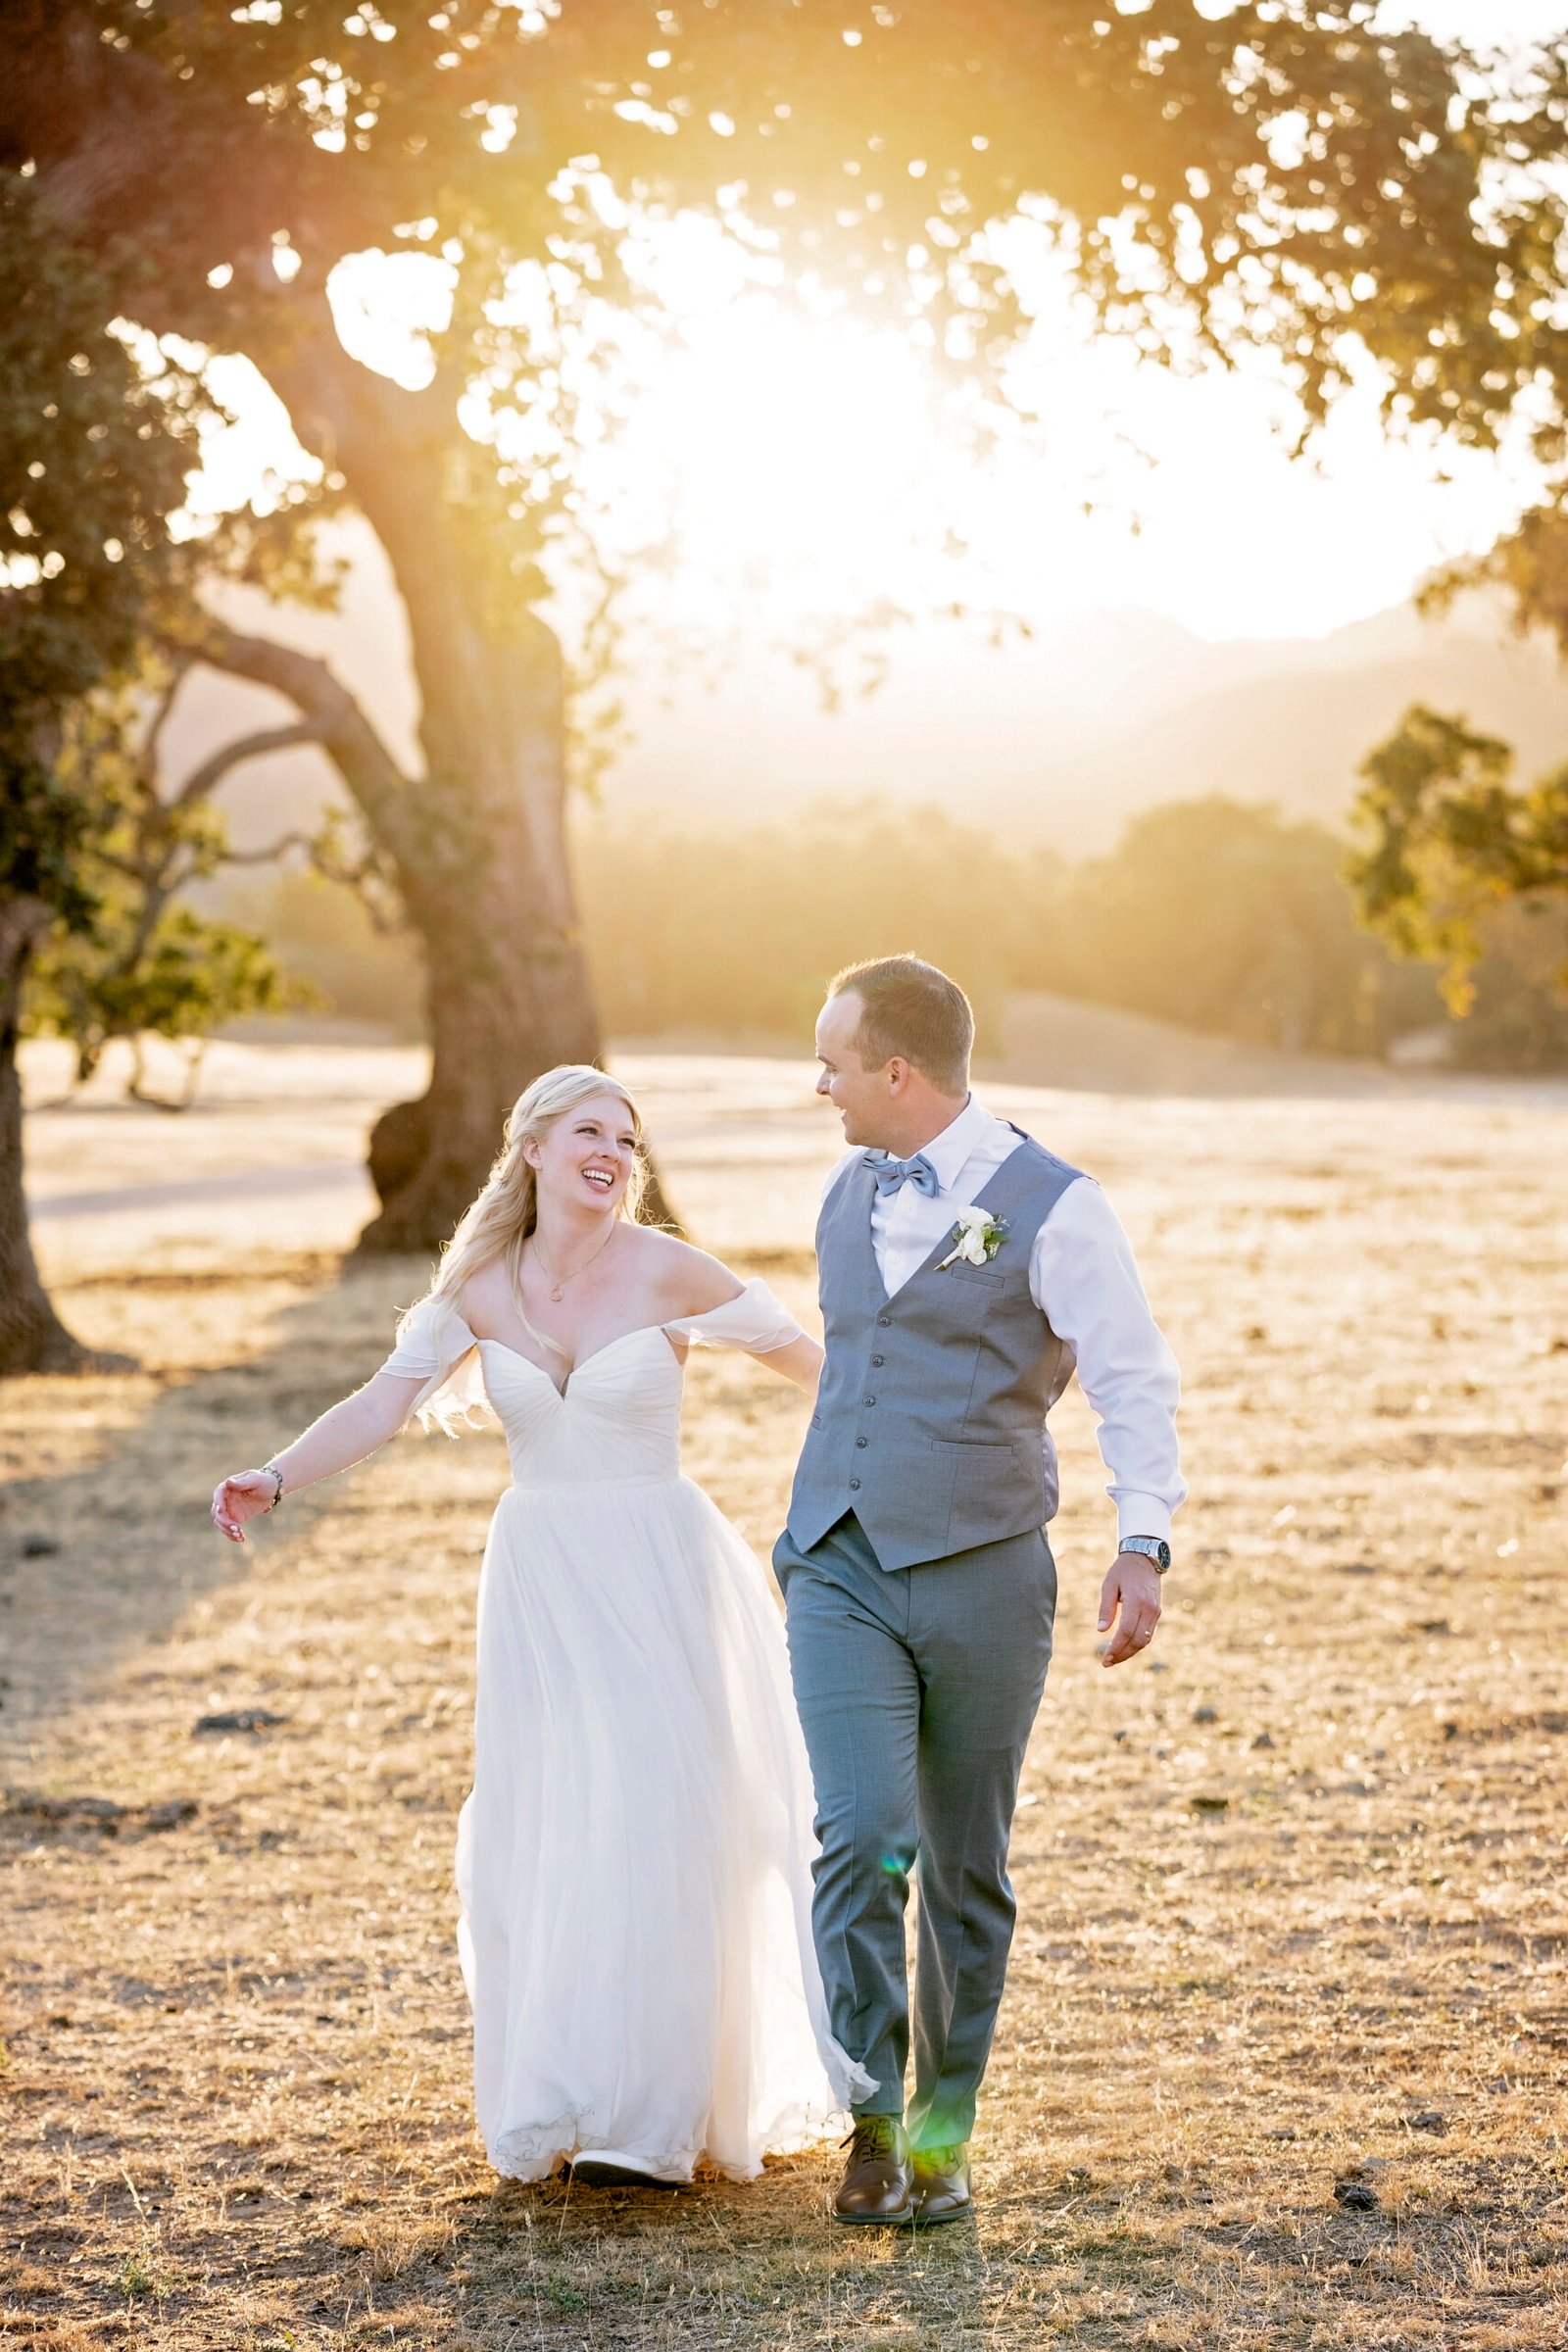 bride and groom laughing in an open field with oak trees